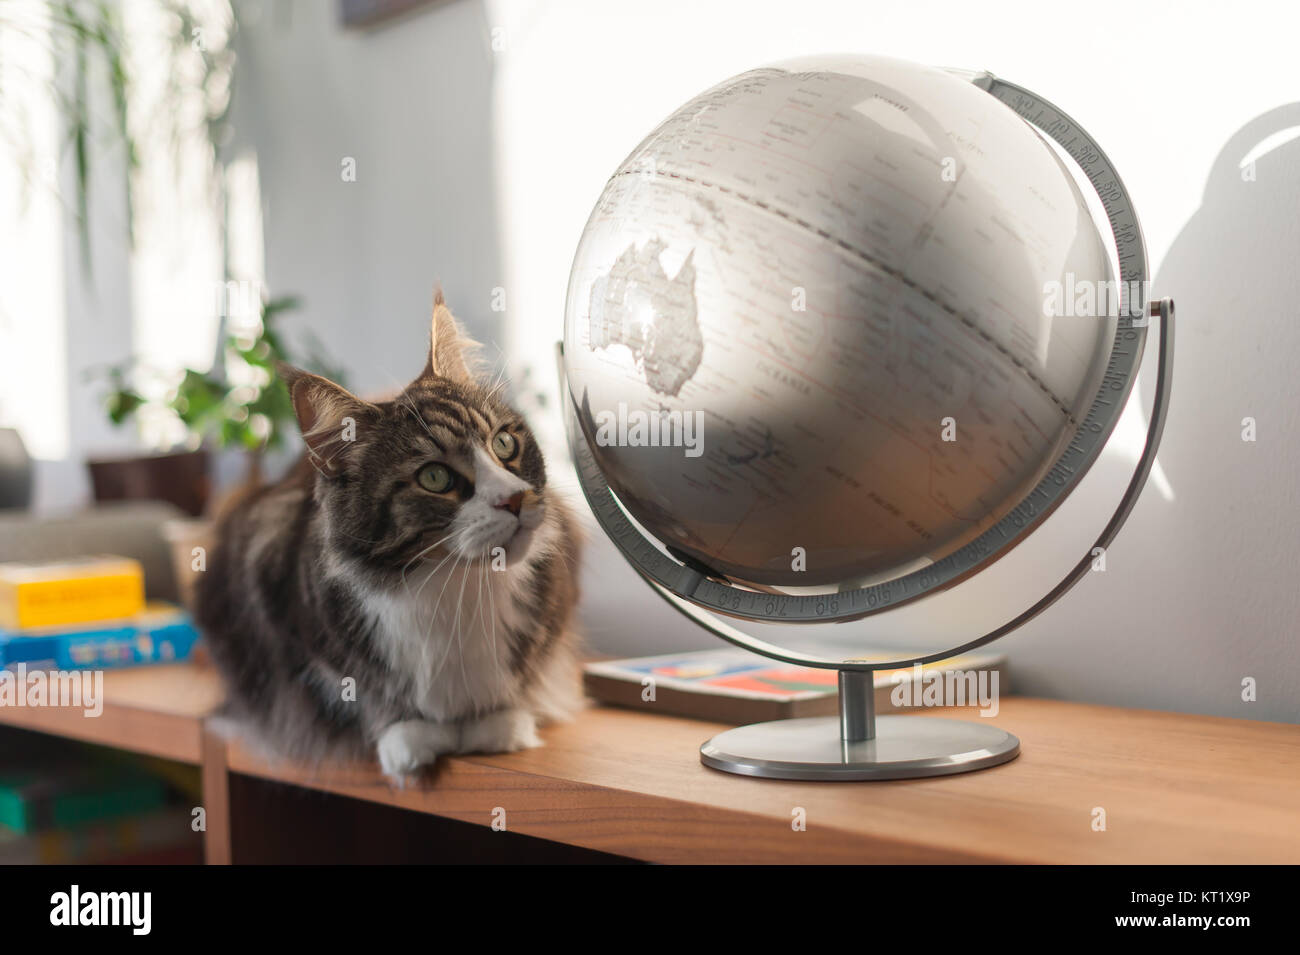 Cat looking at an earth globe Stock Photo